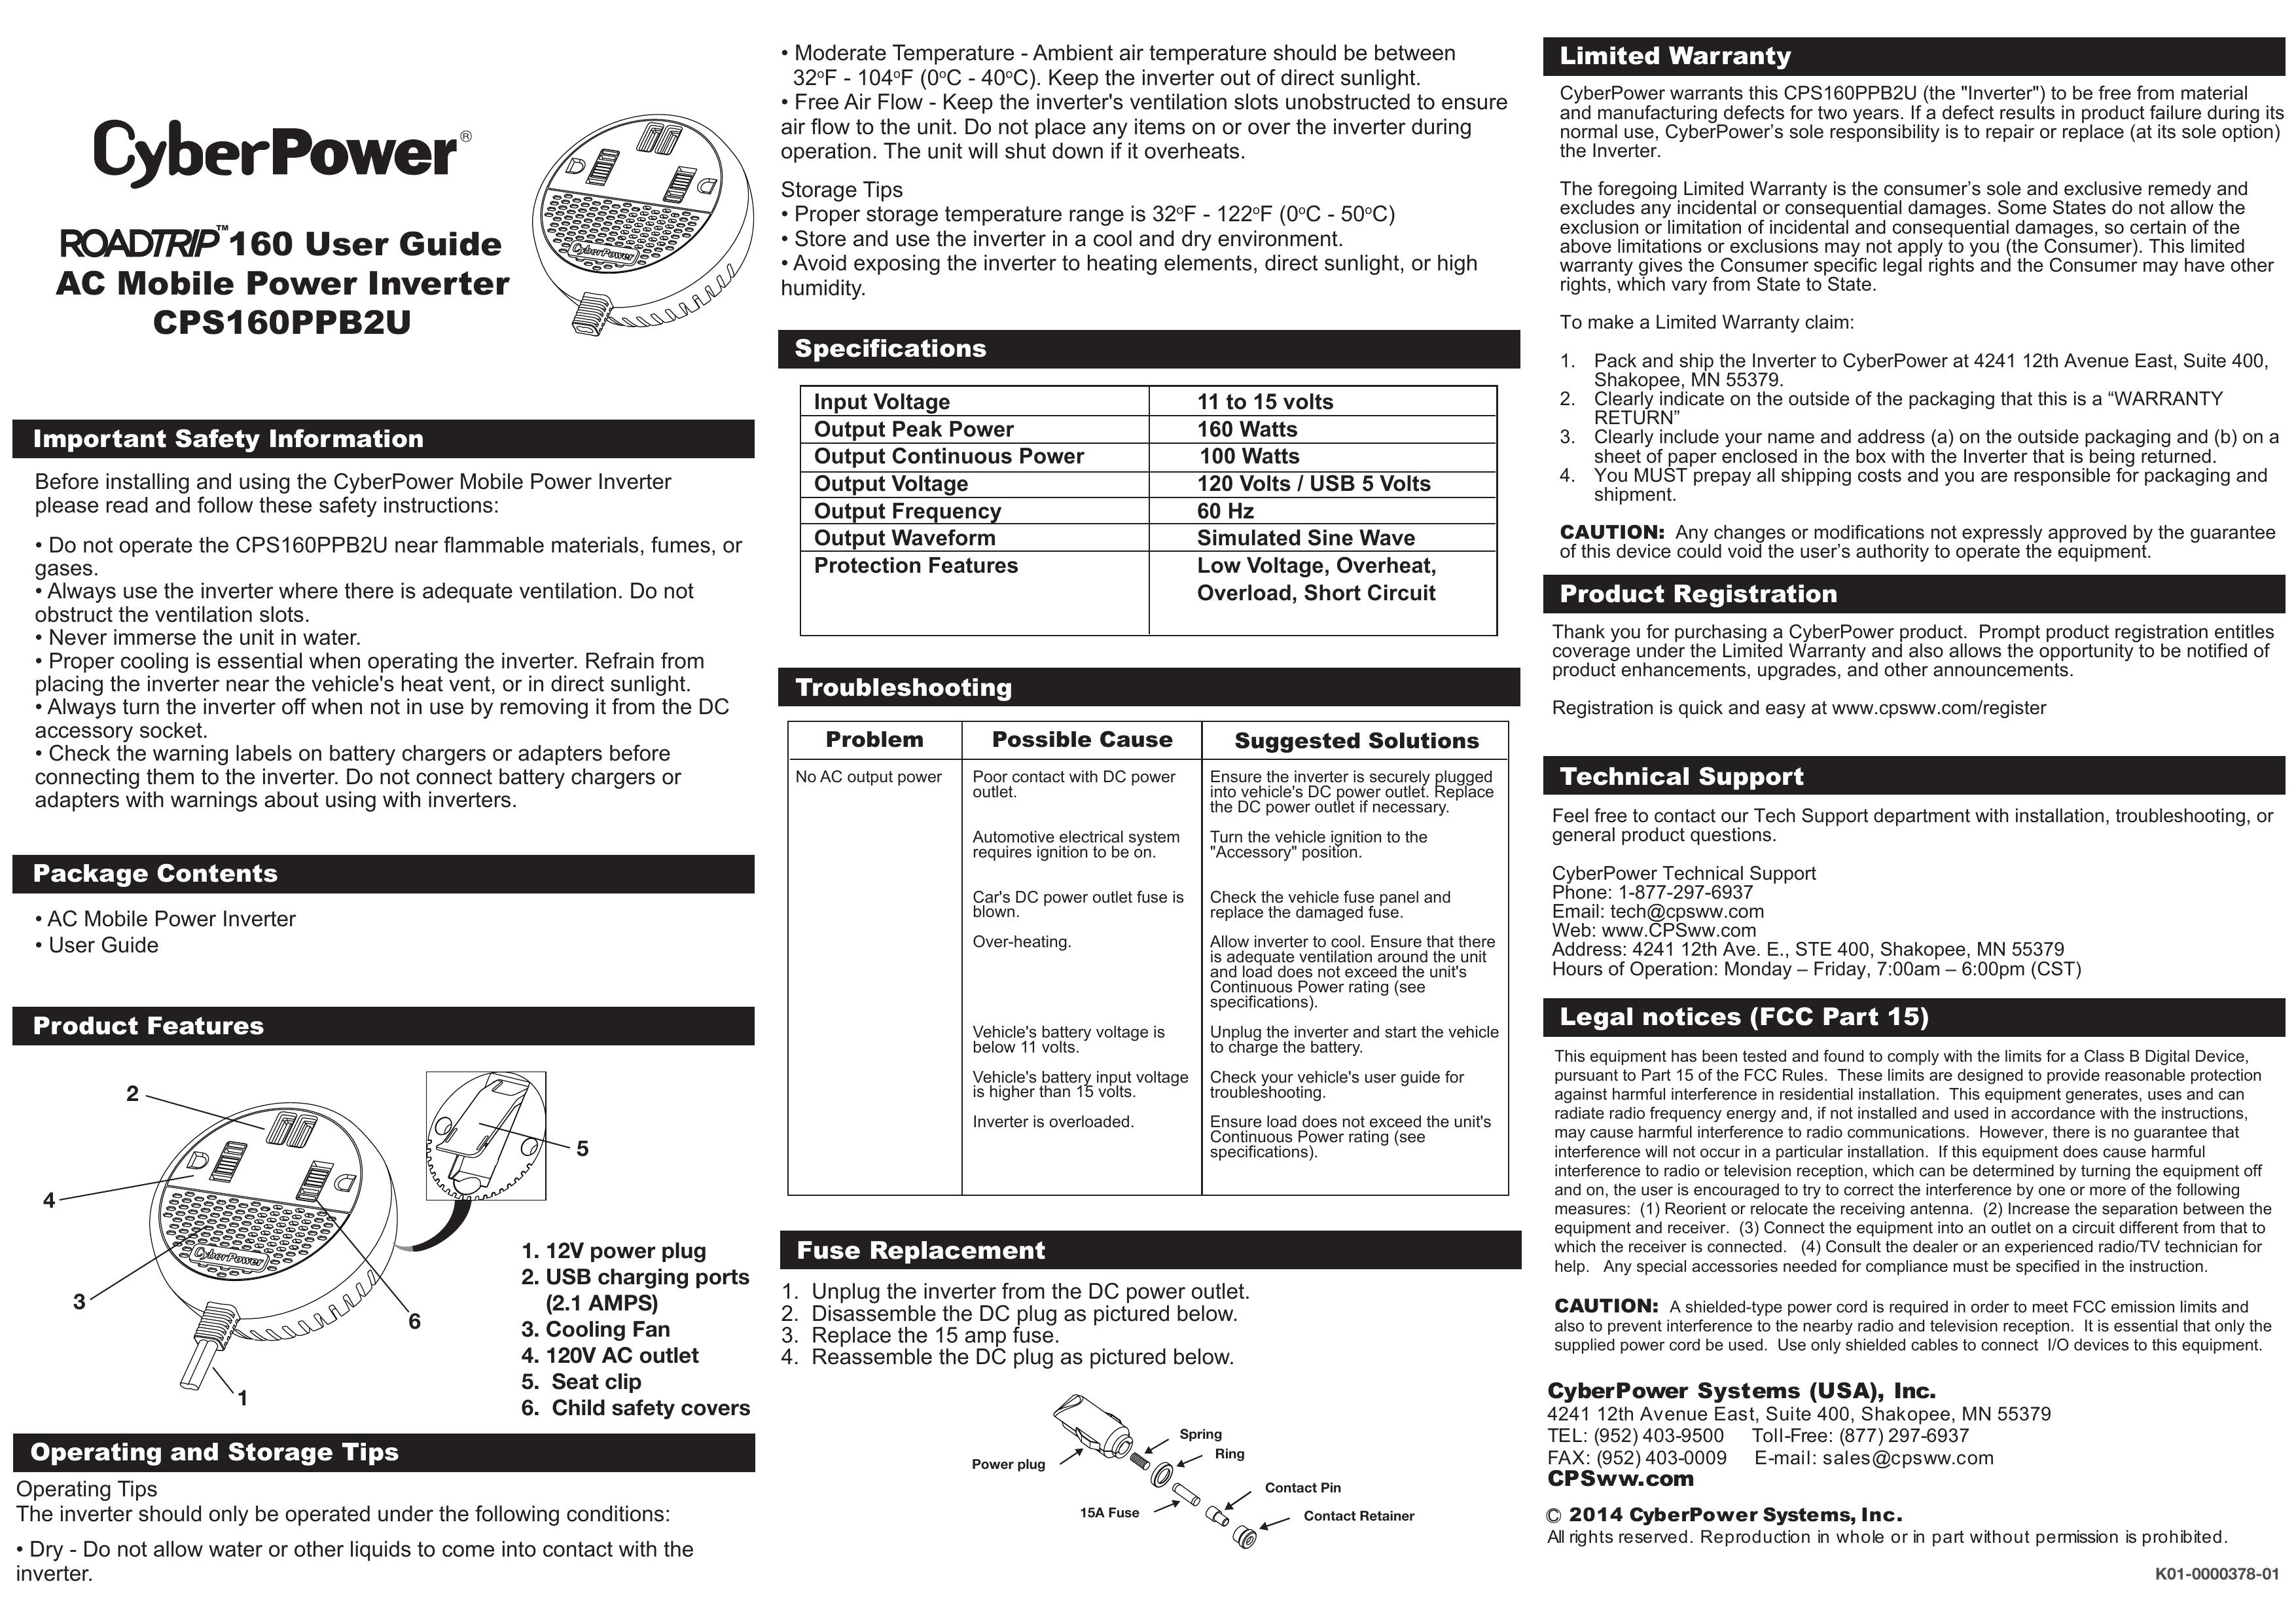 CyberPower CPS160PPB2U Pacemaker User Manual